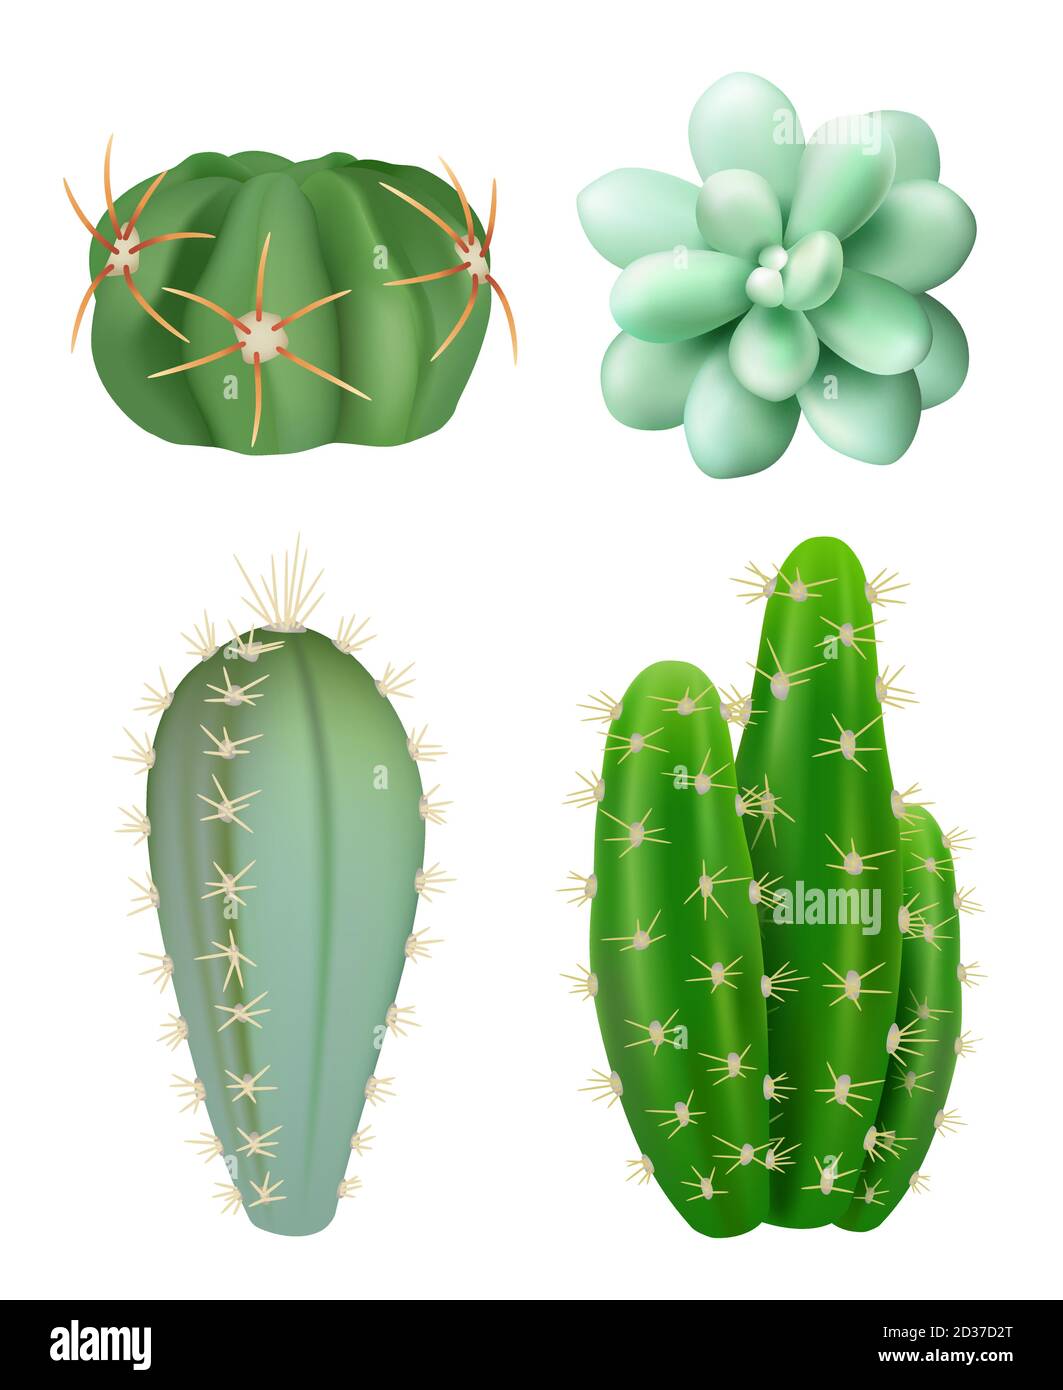 Cactuses plants. Decorative realistic succulent green indoor botanical growing plants different forms vector pictures Stock Vector